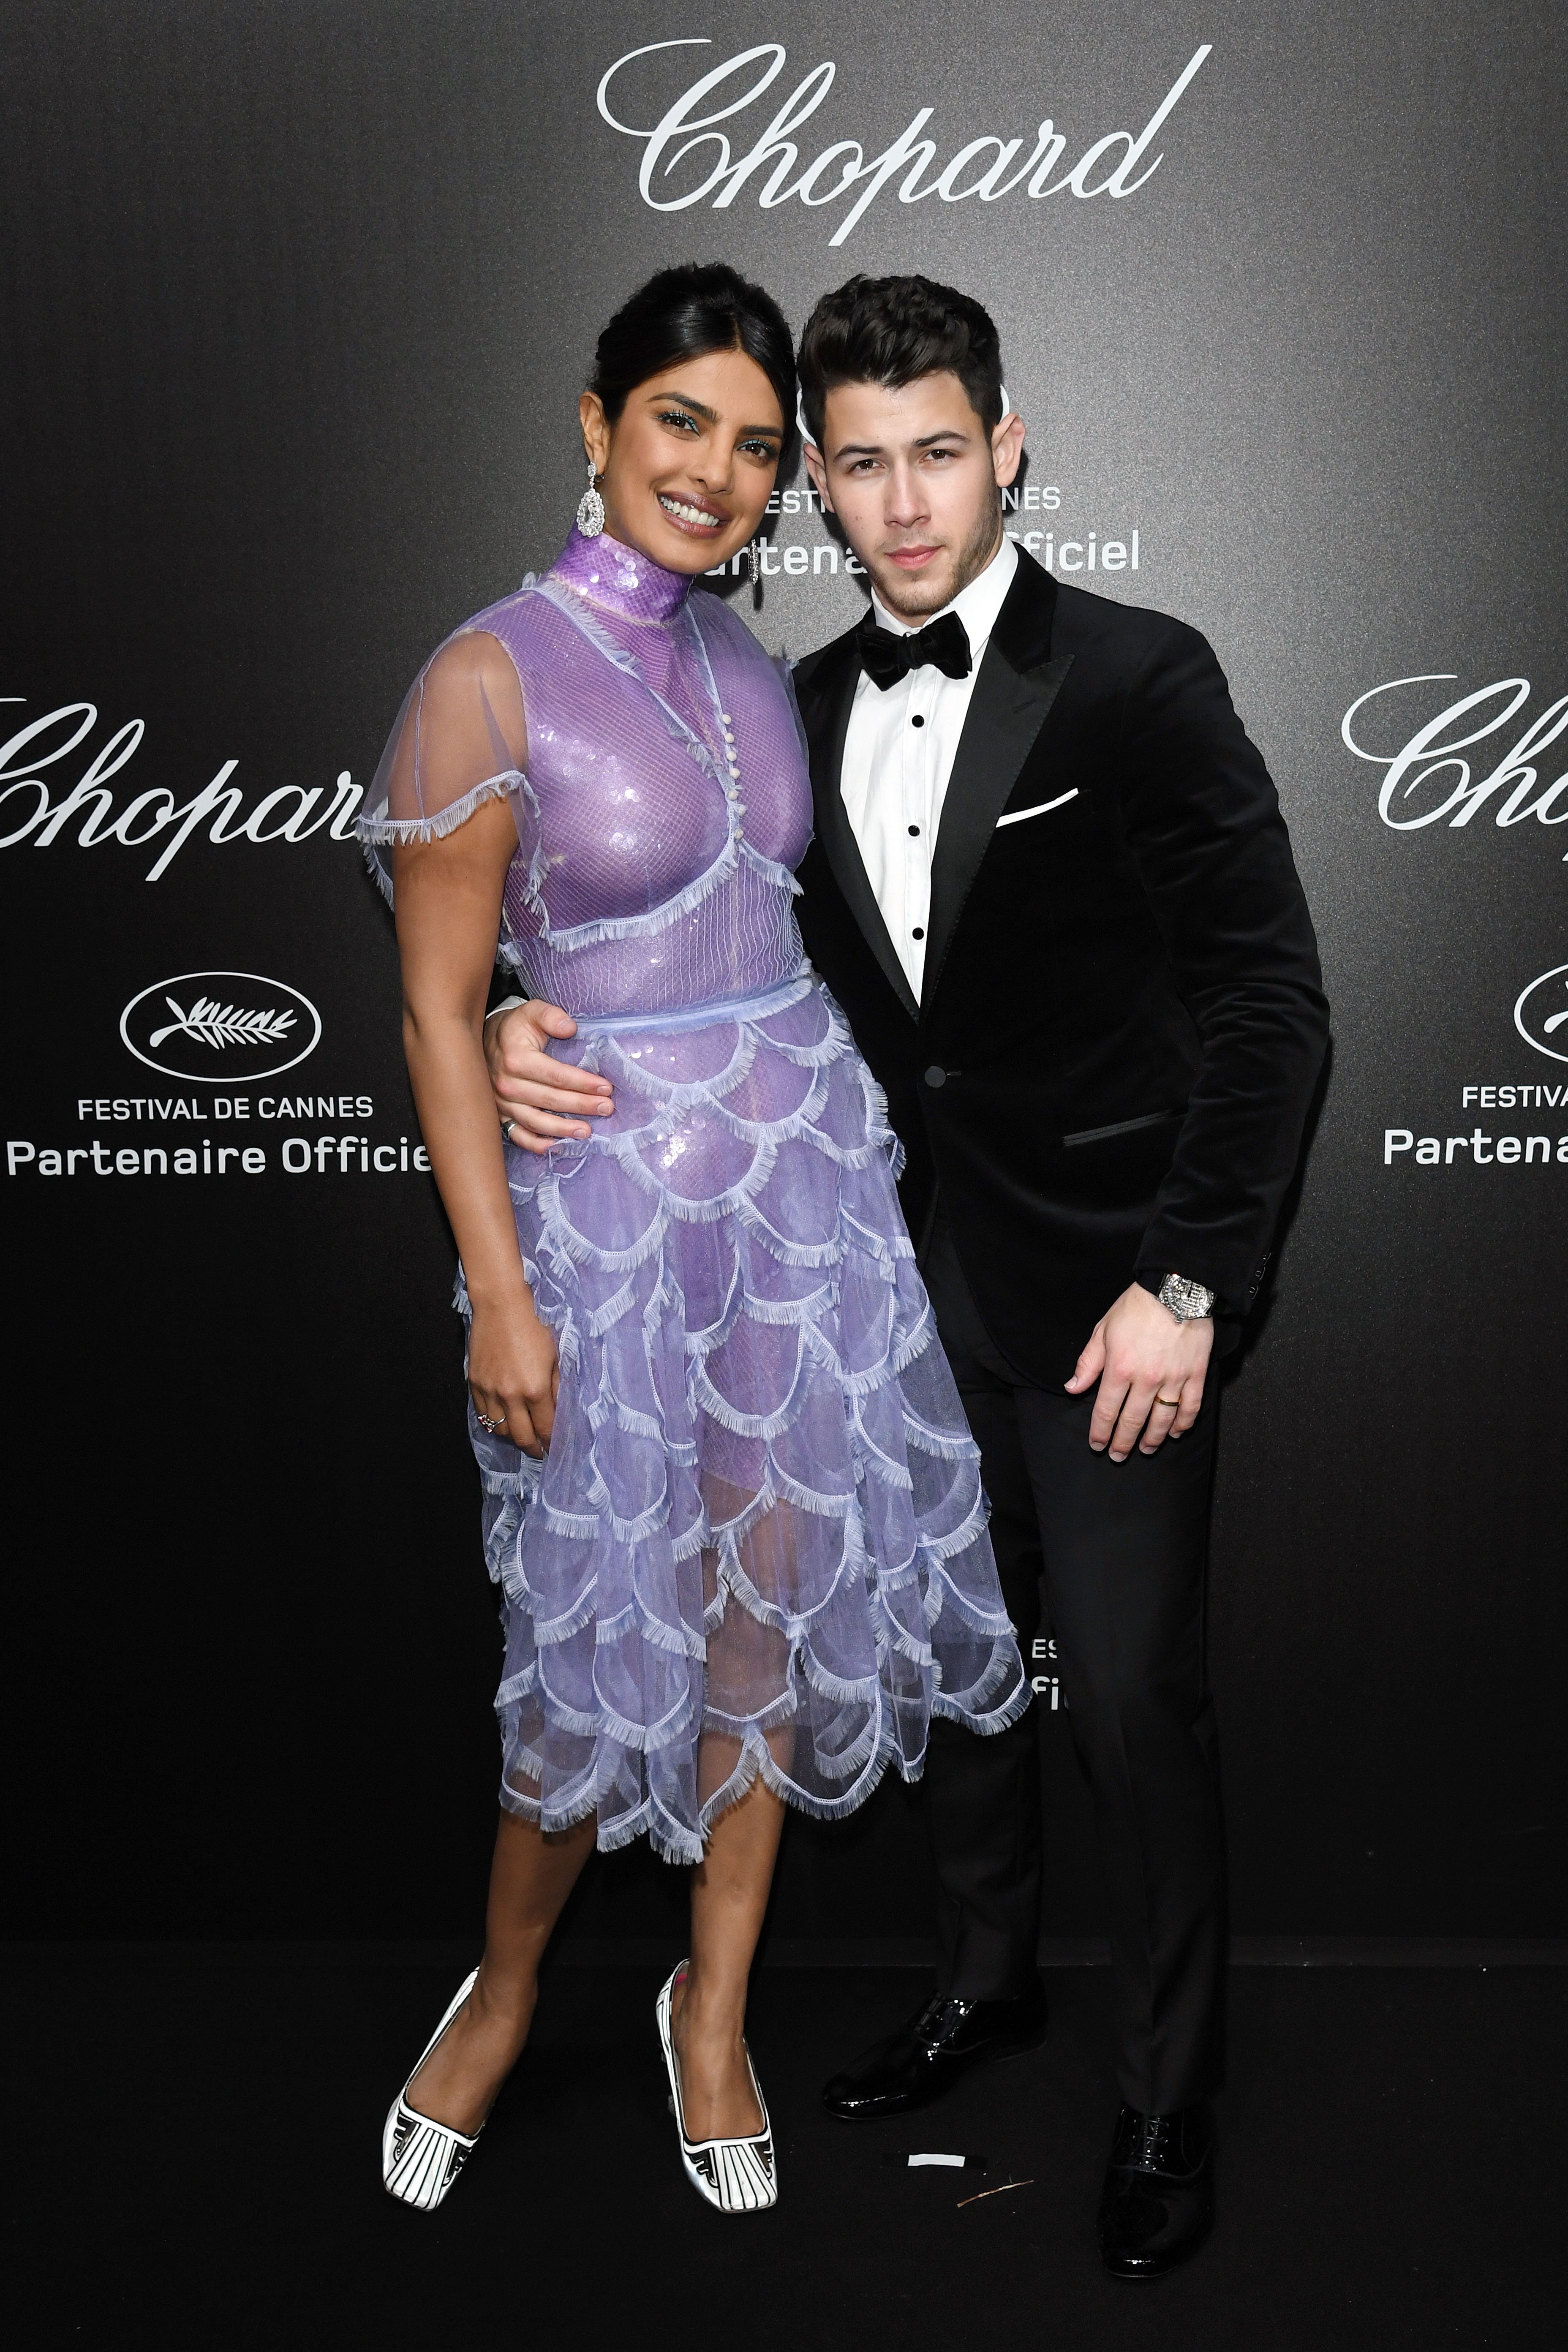  Priyanka Chopra (L) and Nick Jonas attend the Chopard Love Night photocall in Cannes, France on May 17, 2019 | Photo: Getty Images